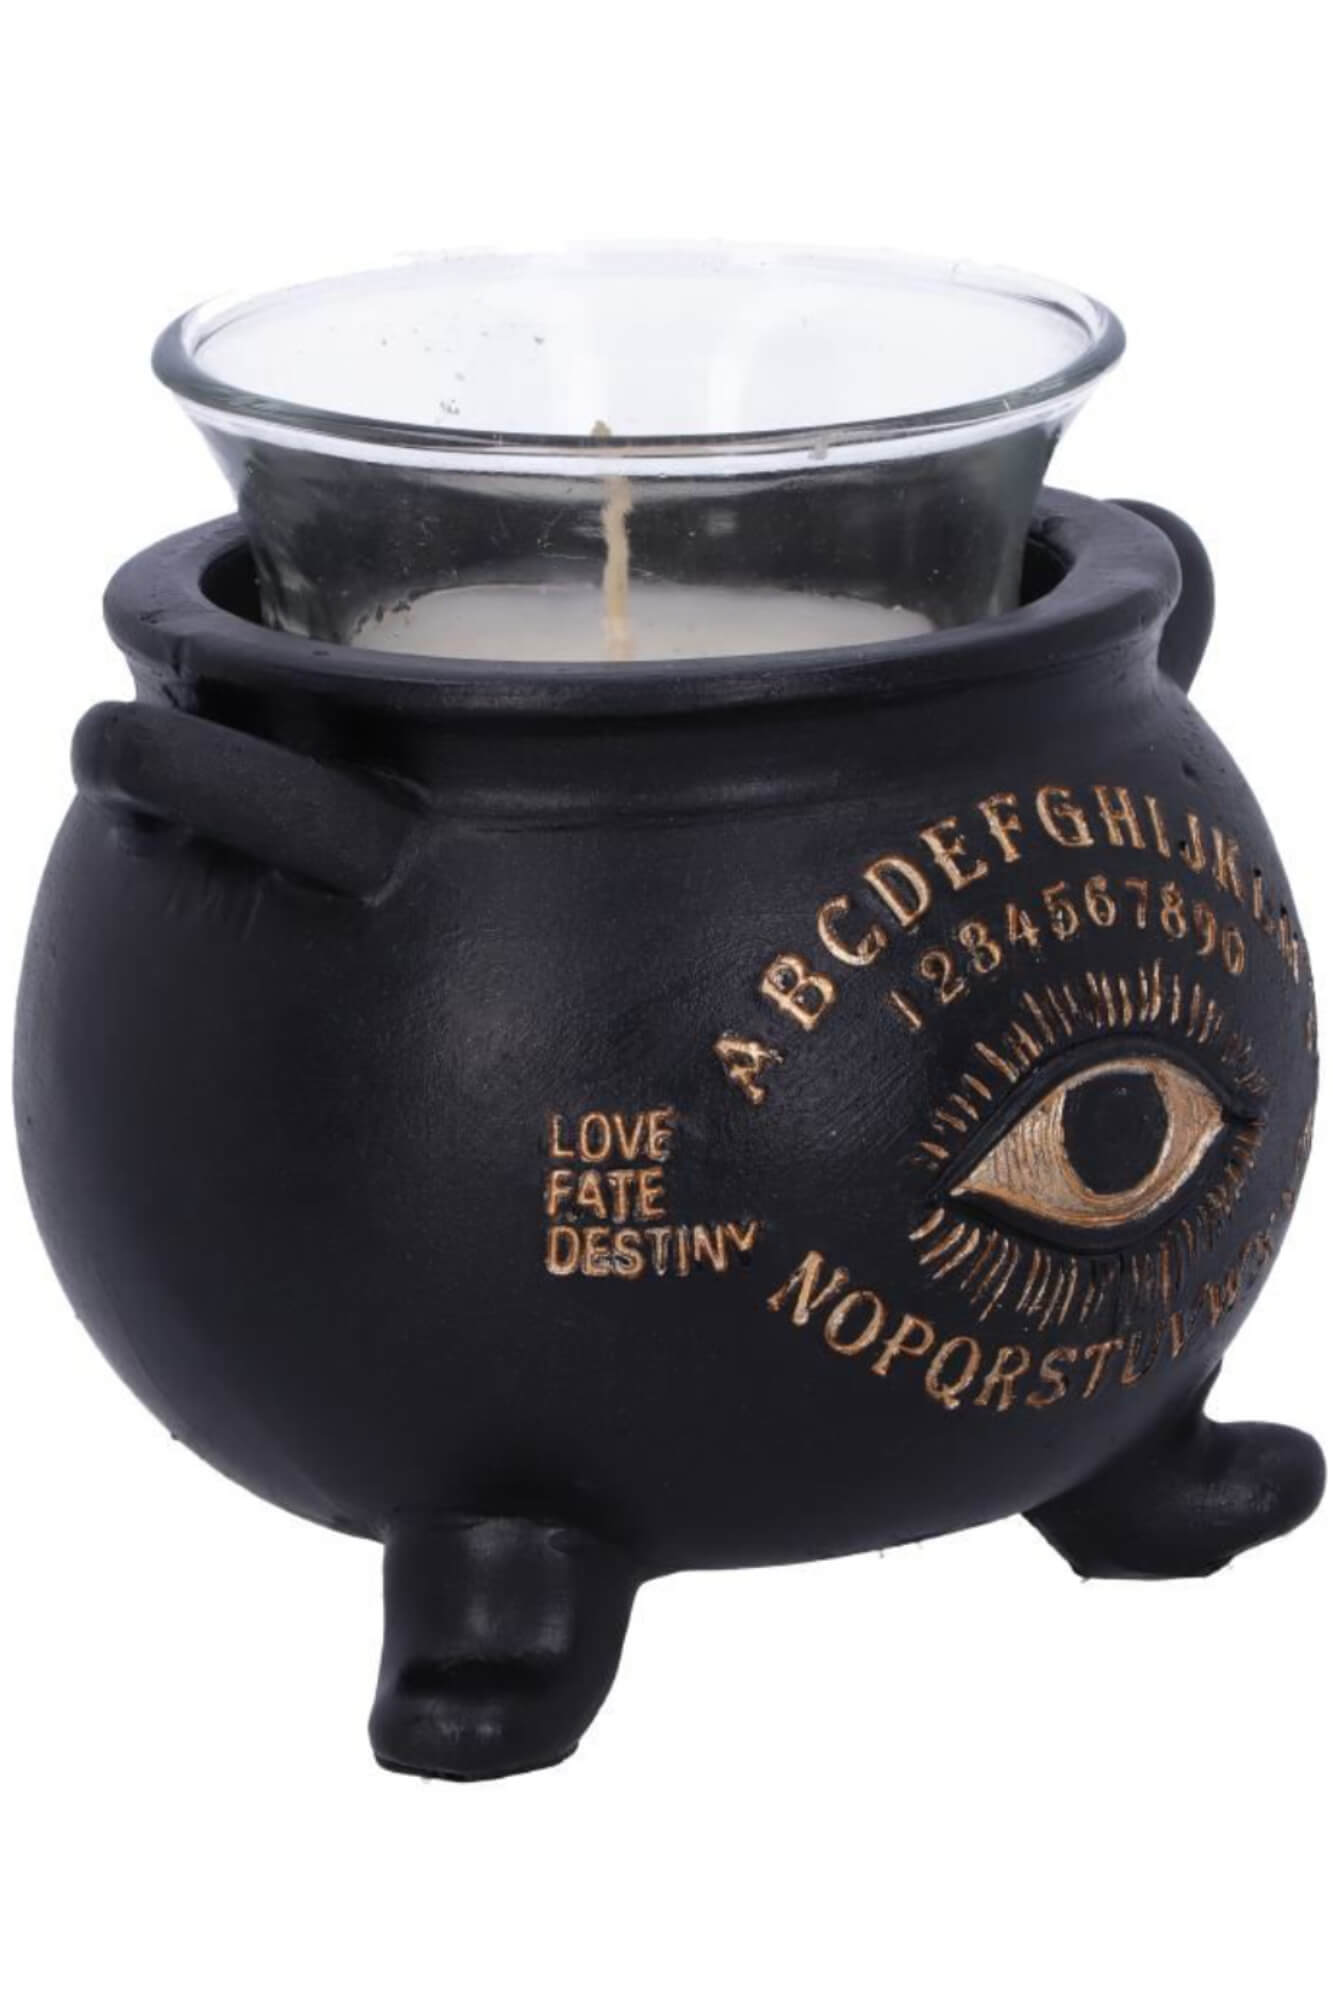 Nemesis Now All Seeing Eye Witches Cauldron Tealight Candle Holder